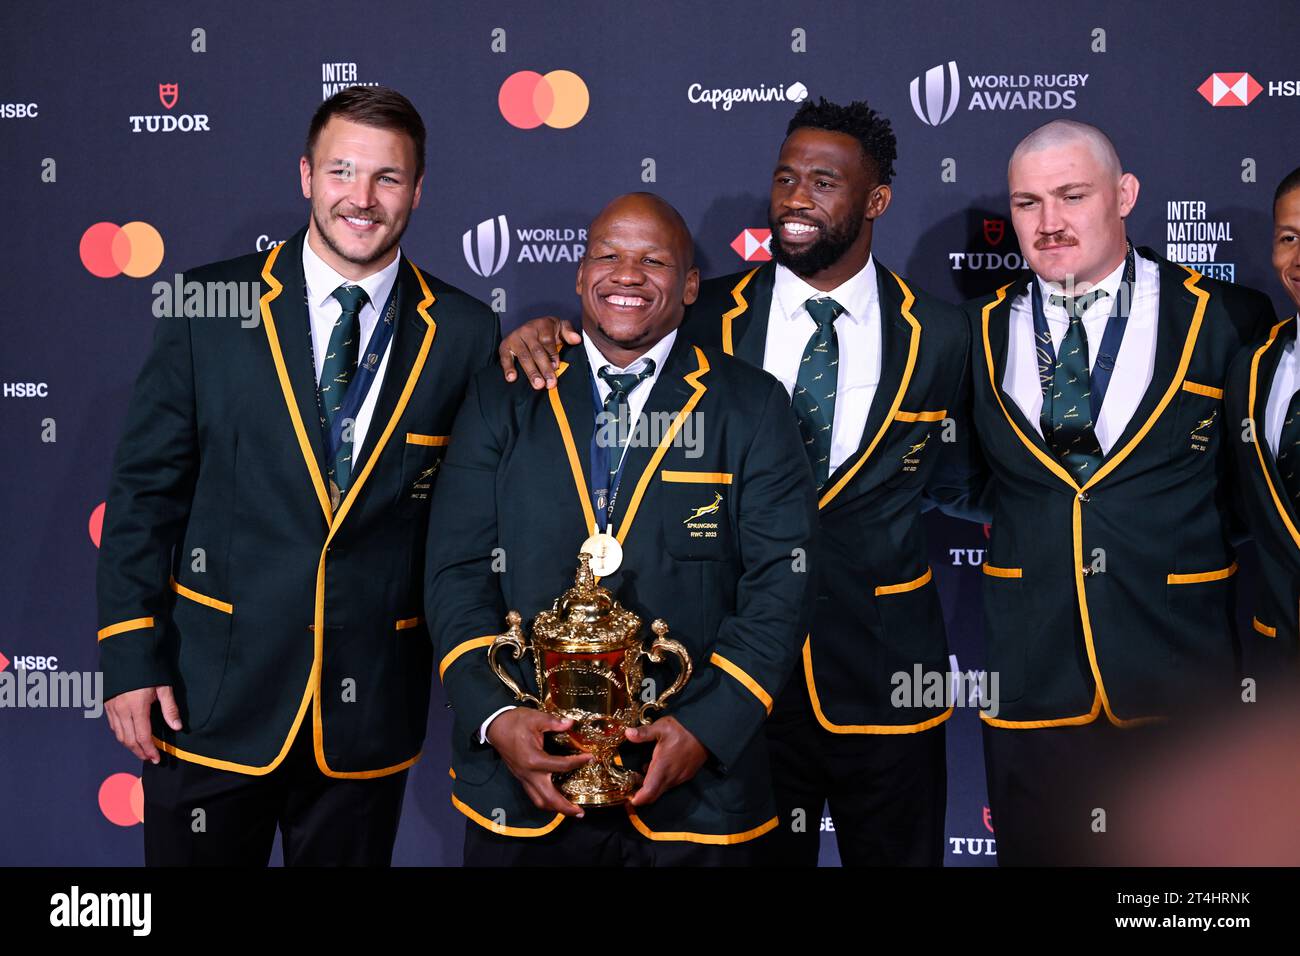 Paris, France. 29th Oct, 2023. Andre Esterhuizen Bongi Mbonambi Siya Kolisi and Jasper Wiese with the William Webb Ellis Cup during the World Rugby Awards at Opera Garnier on October 29, 2023 in Paris, France. Credit: Victor Joly/Alamy Live News Stock Photo